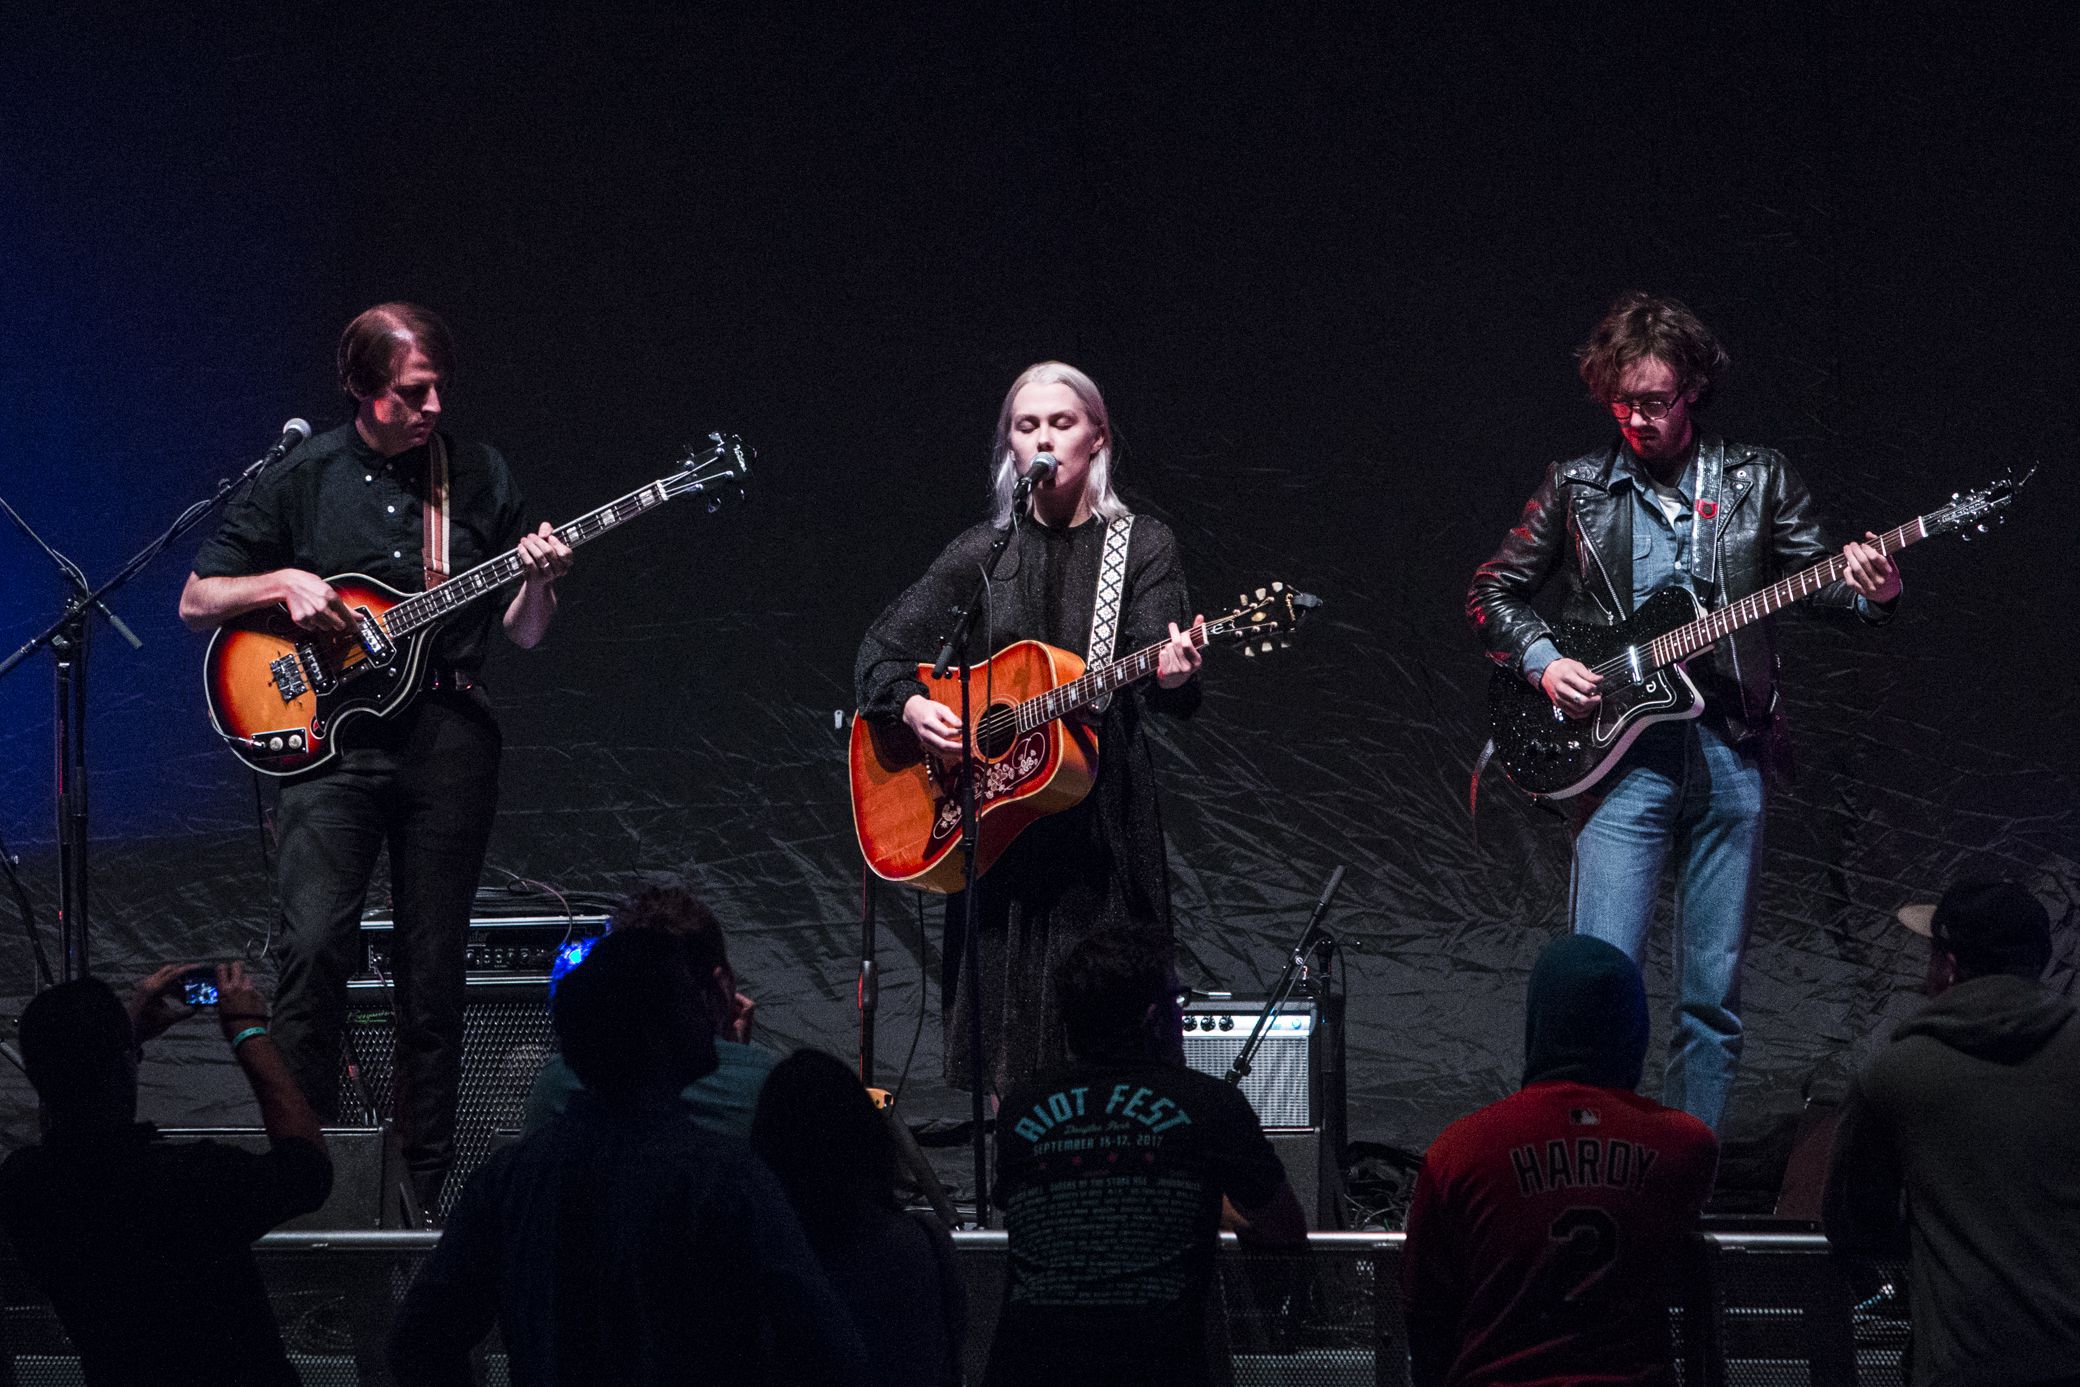 phoebe bridgers 1 Live Review: The War on Drugs at the Greek Theatre in Los Angeles (10/5)